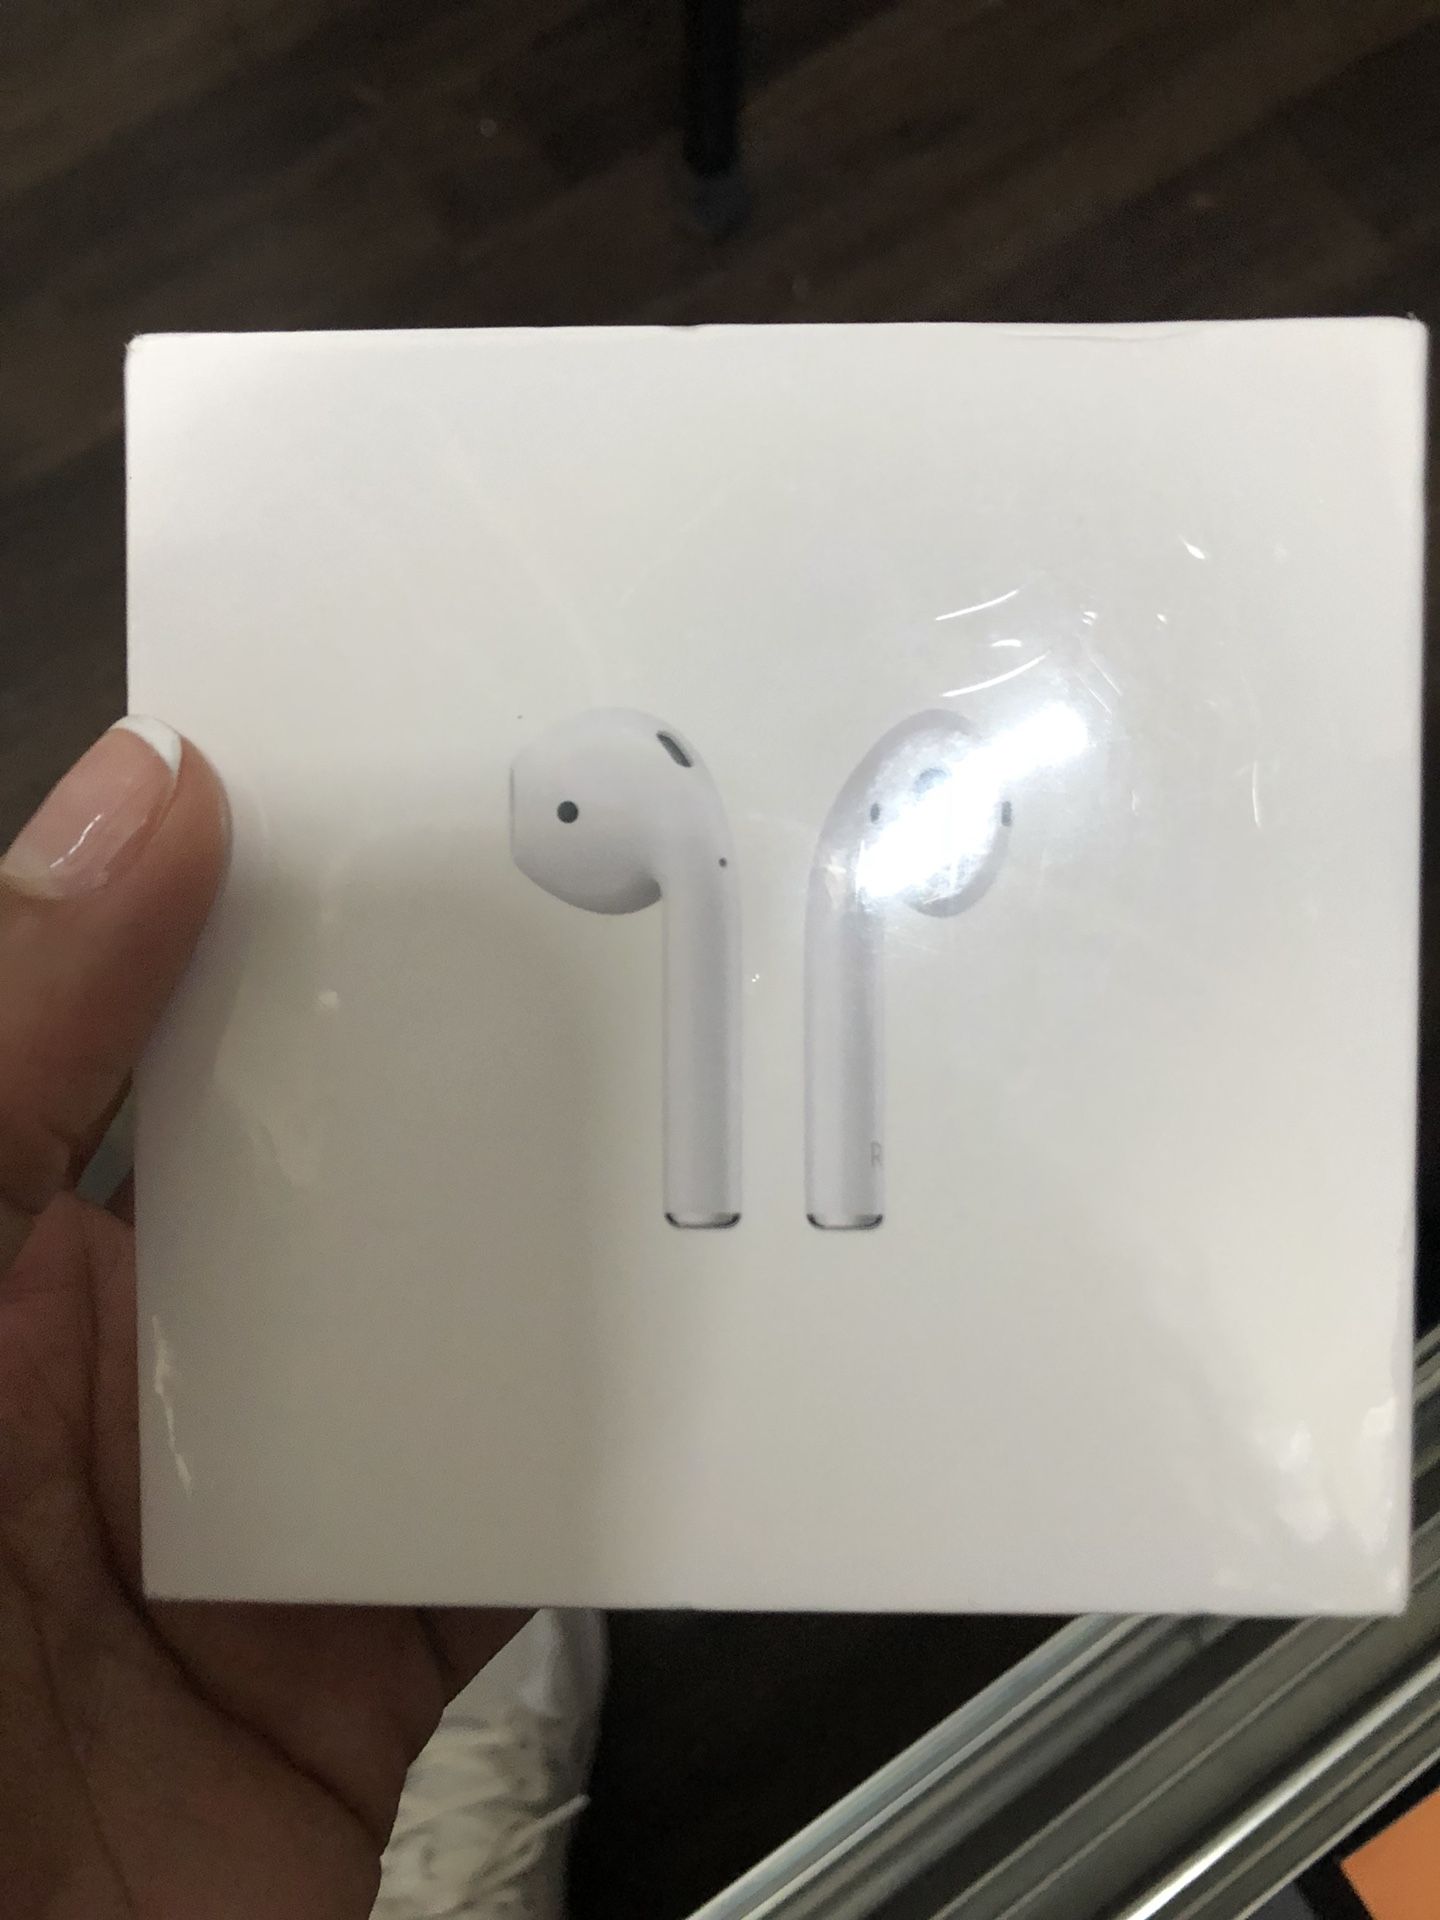 Brand new Apple AirPods